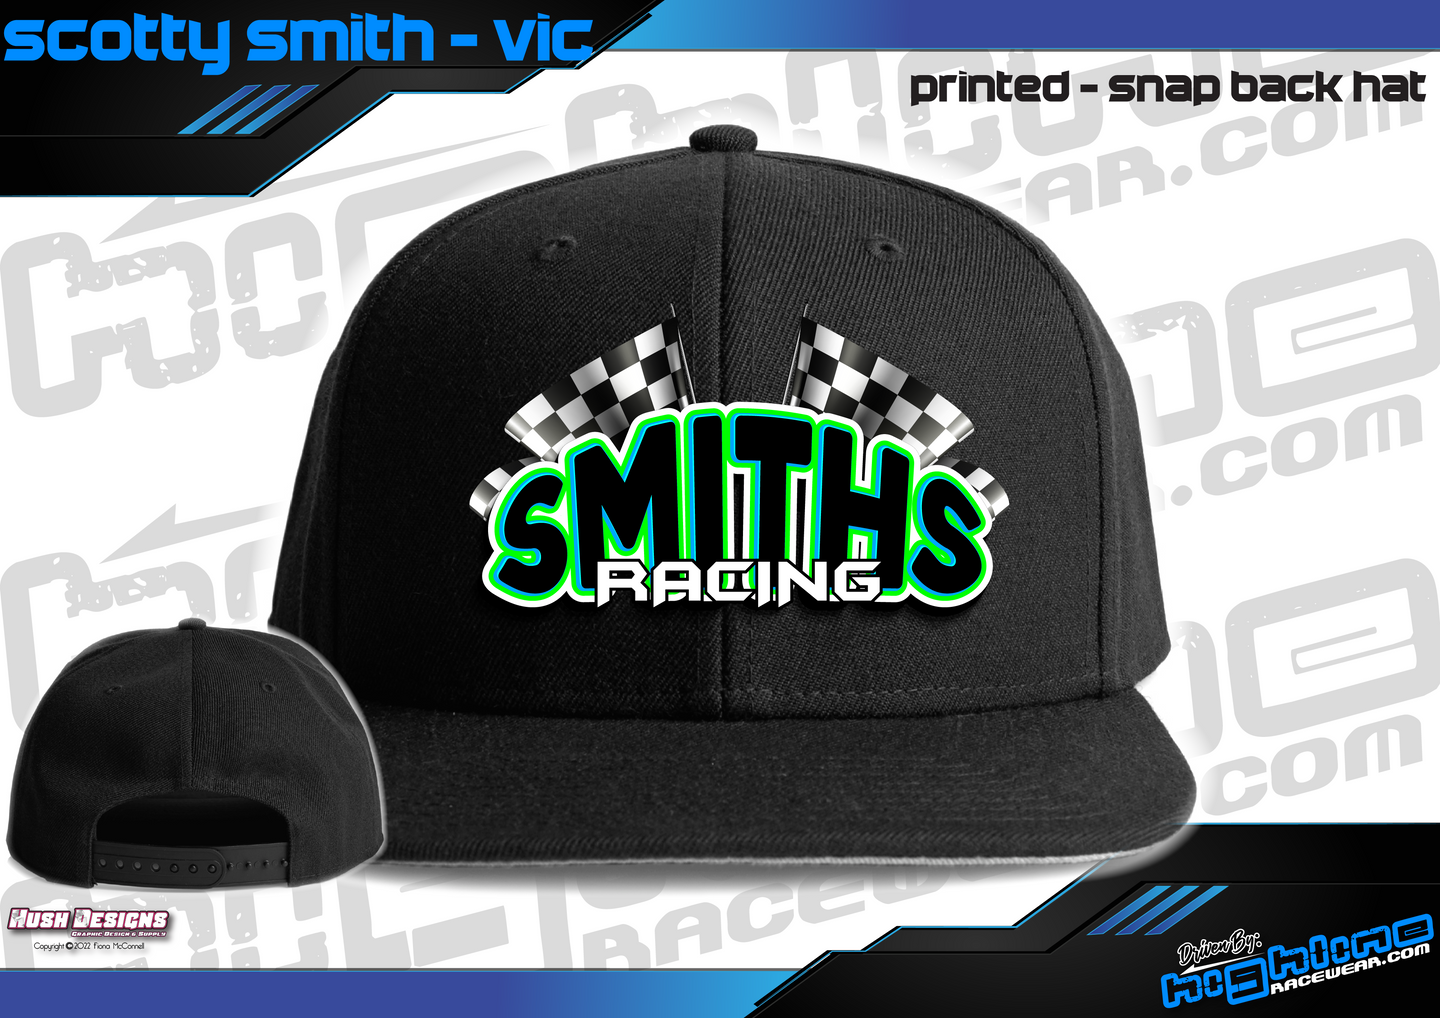 Printed Snap Back CAP - Scotty Smith